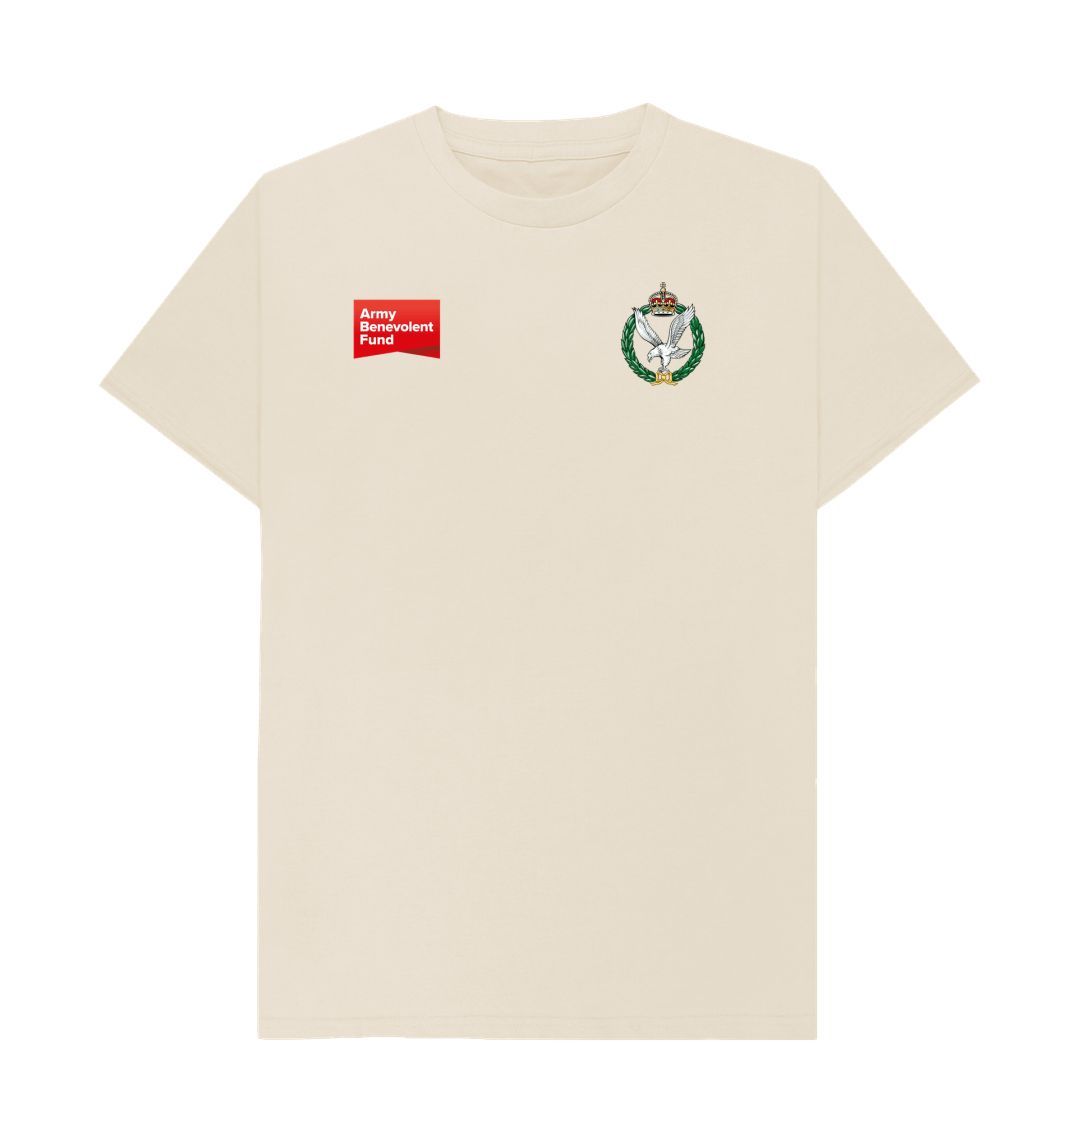 Army Air Corps Unisex T-shirt - Army Benevolent Fund